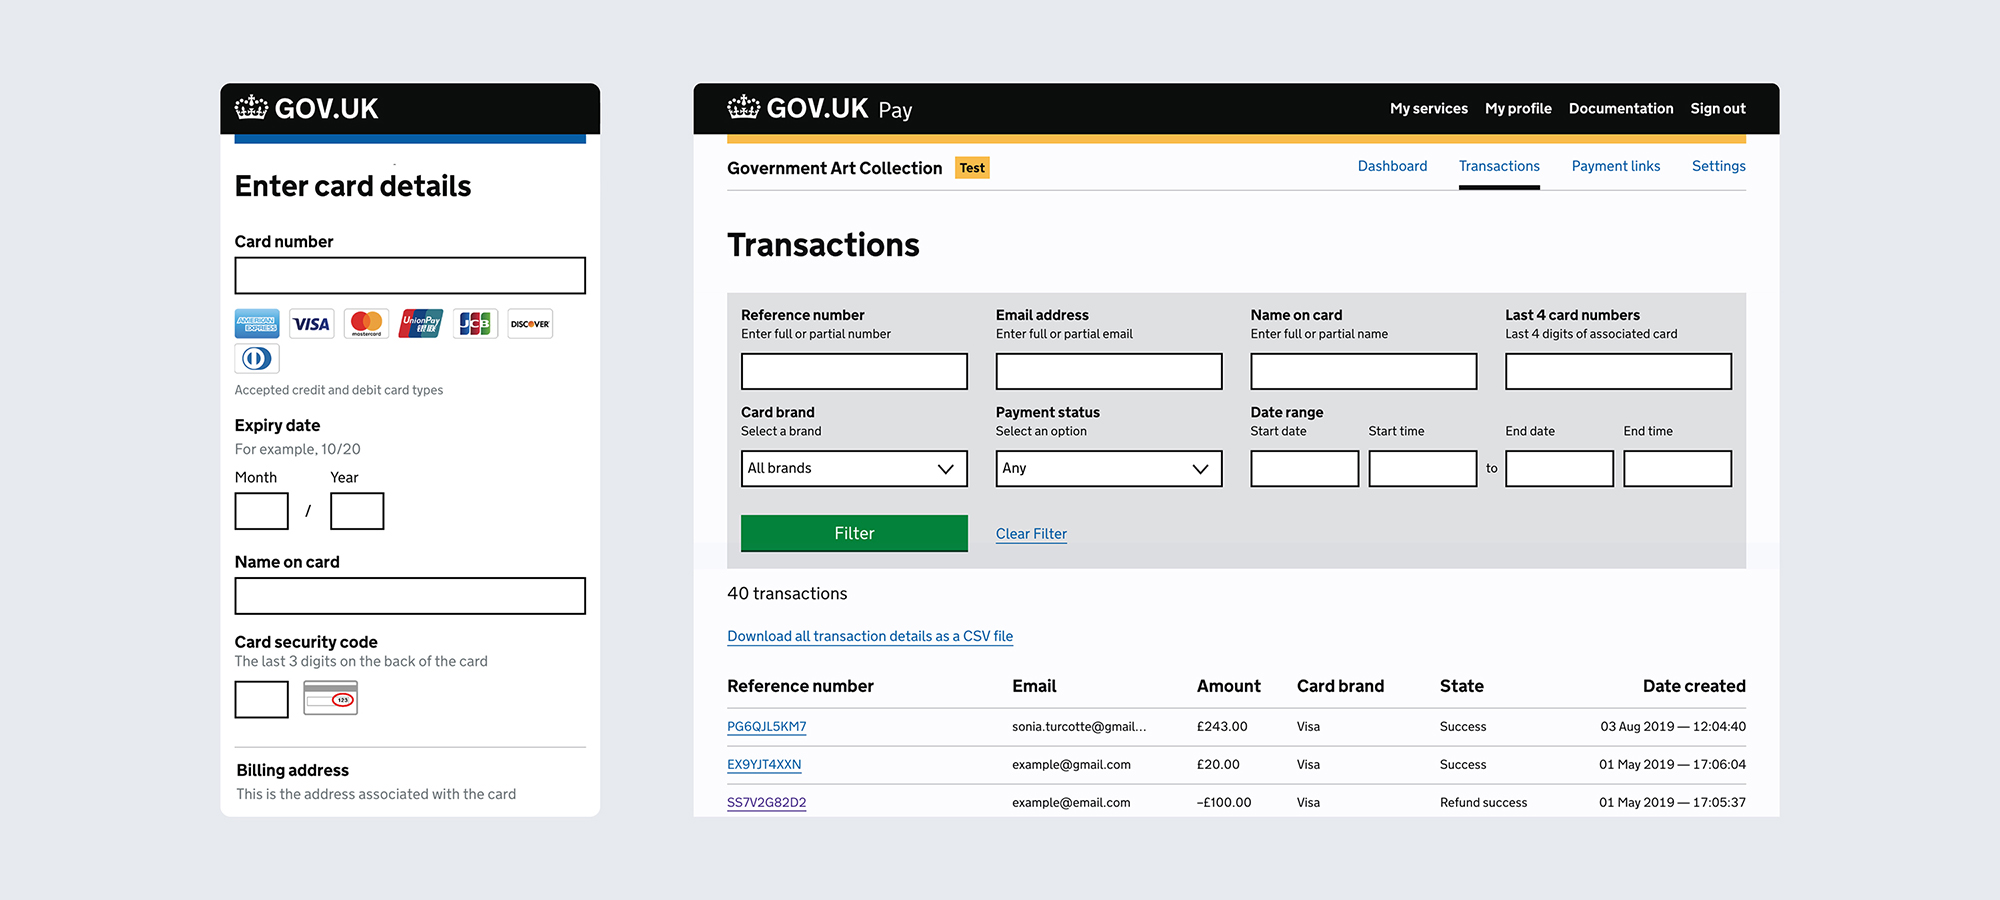 Mobile view of a payment page and desktop view of the transactions admin interface